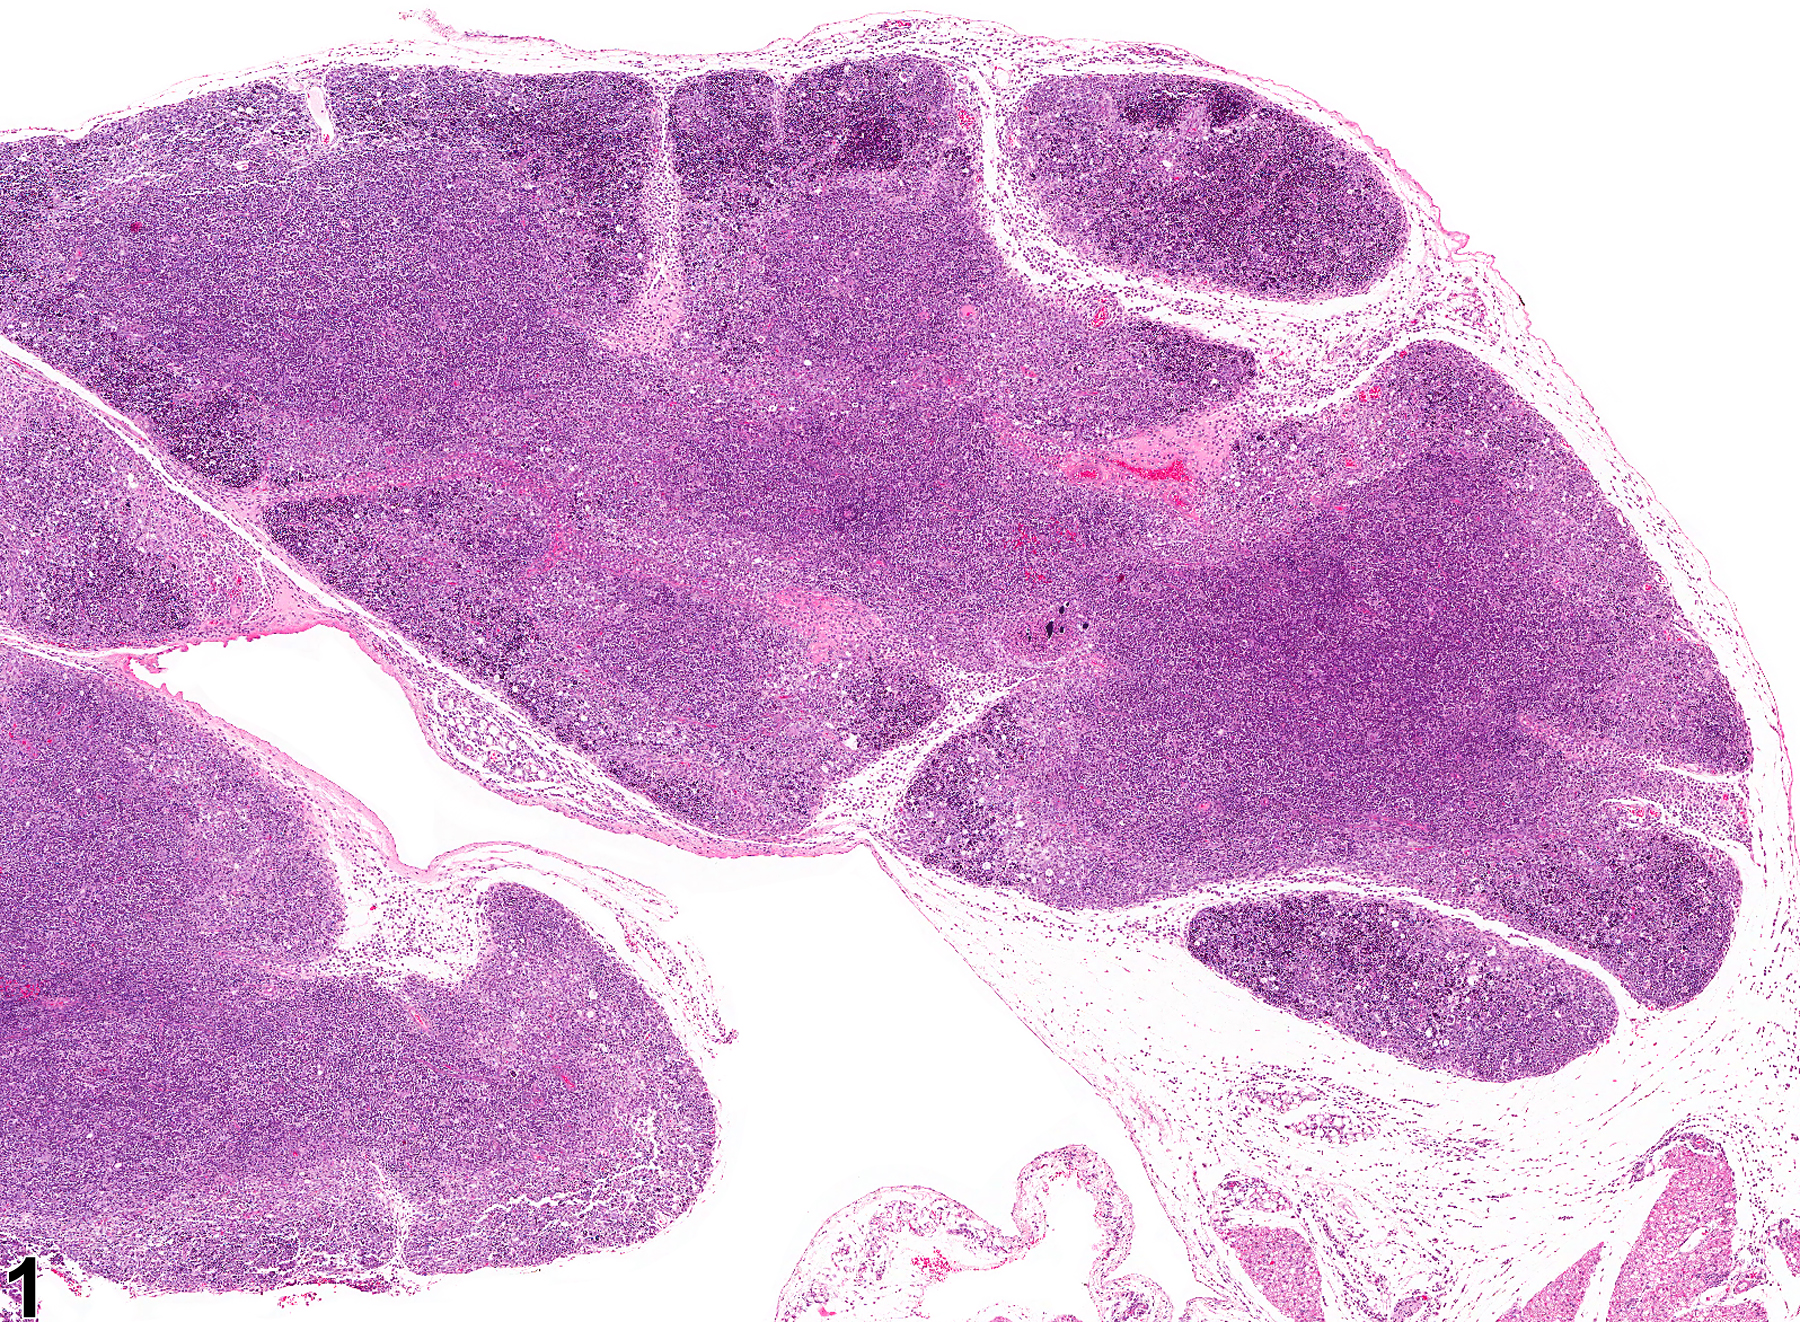 Image of necrosis, lymphocyte in the thymus from a male Harlan Sprague-Dawley rat in a chronic study